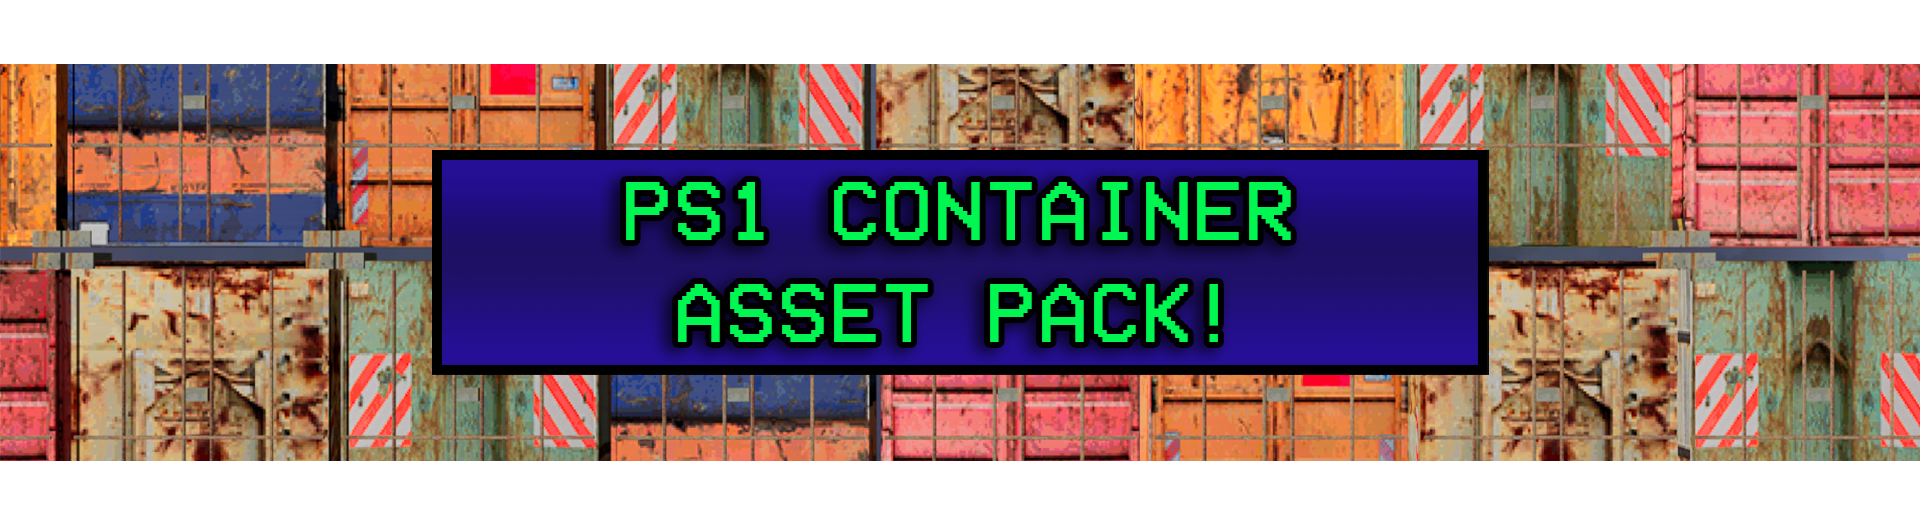 PSX PS1 Containers Low Poly - Asset Pack!